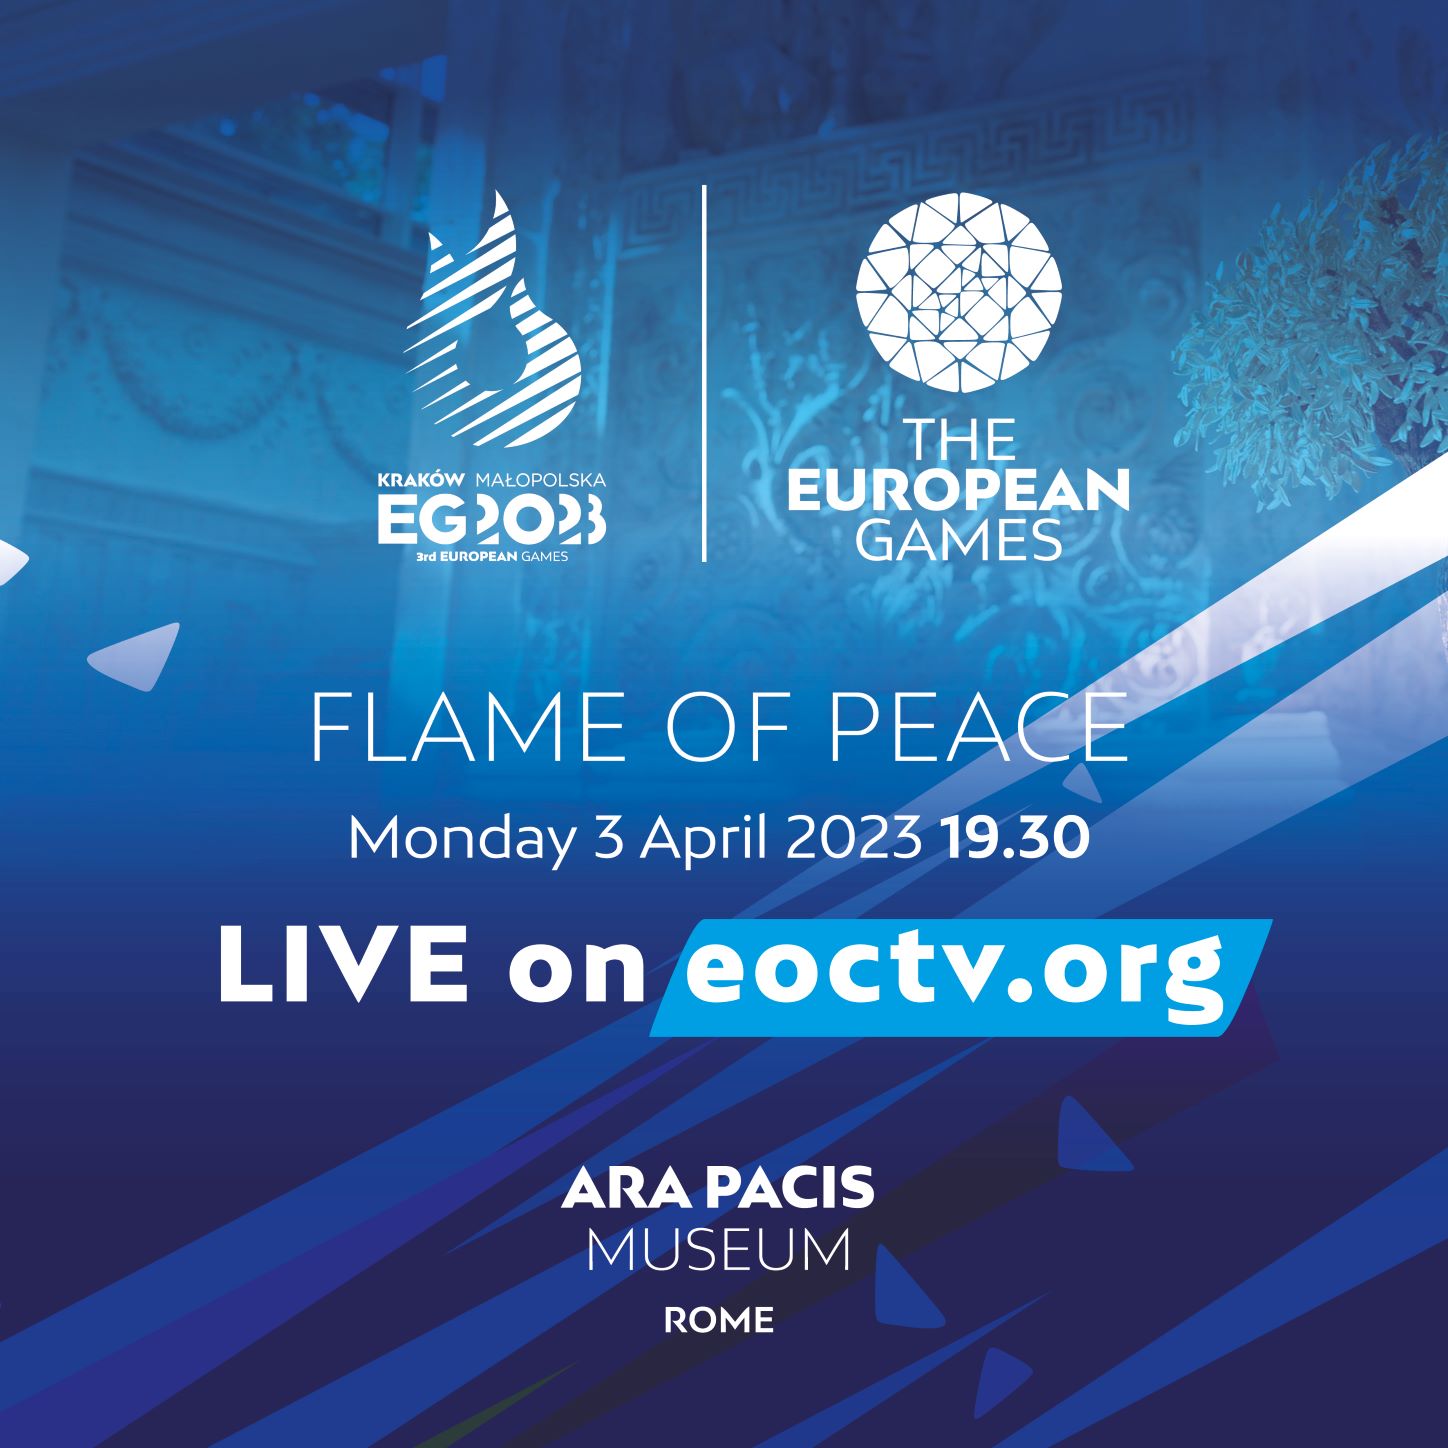 President of Poland will join the Flame of Peace handover ceremony in Rome